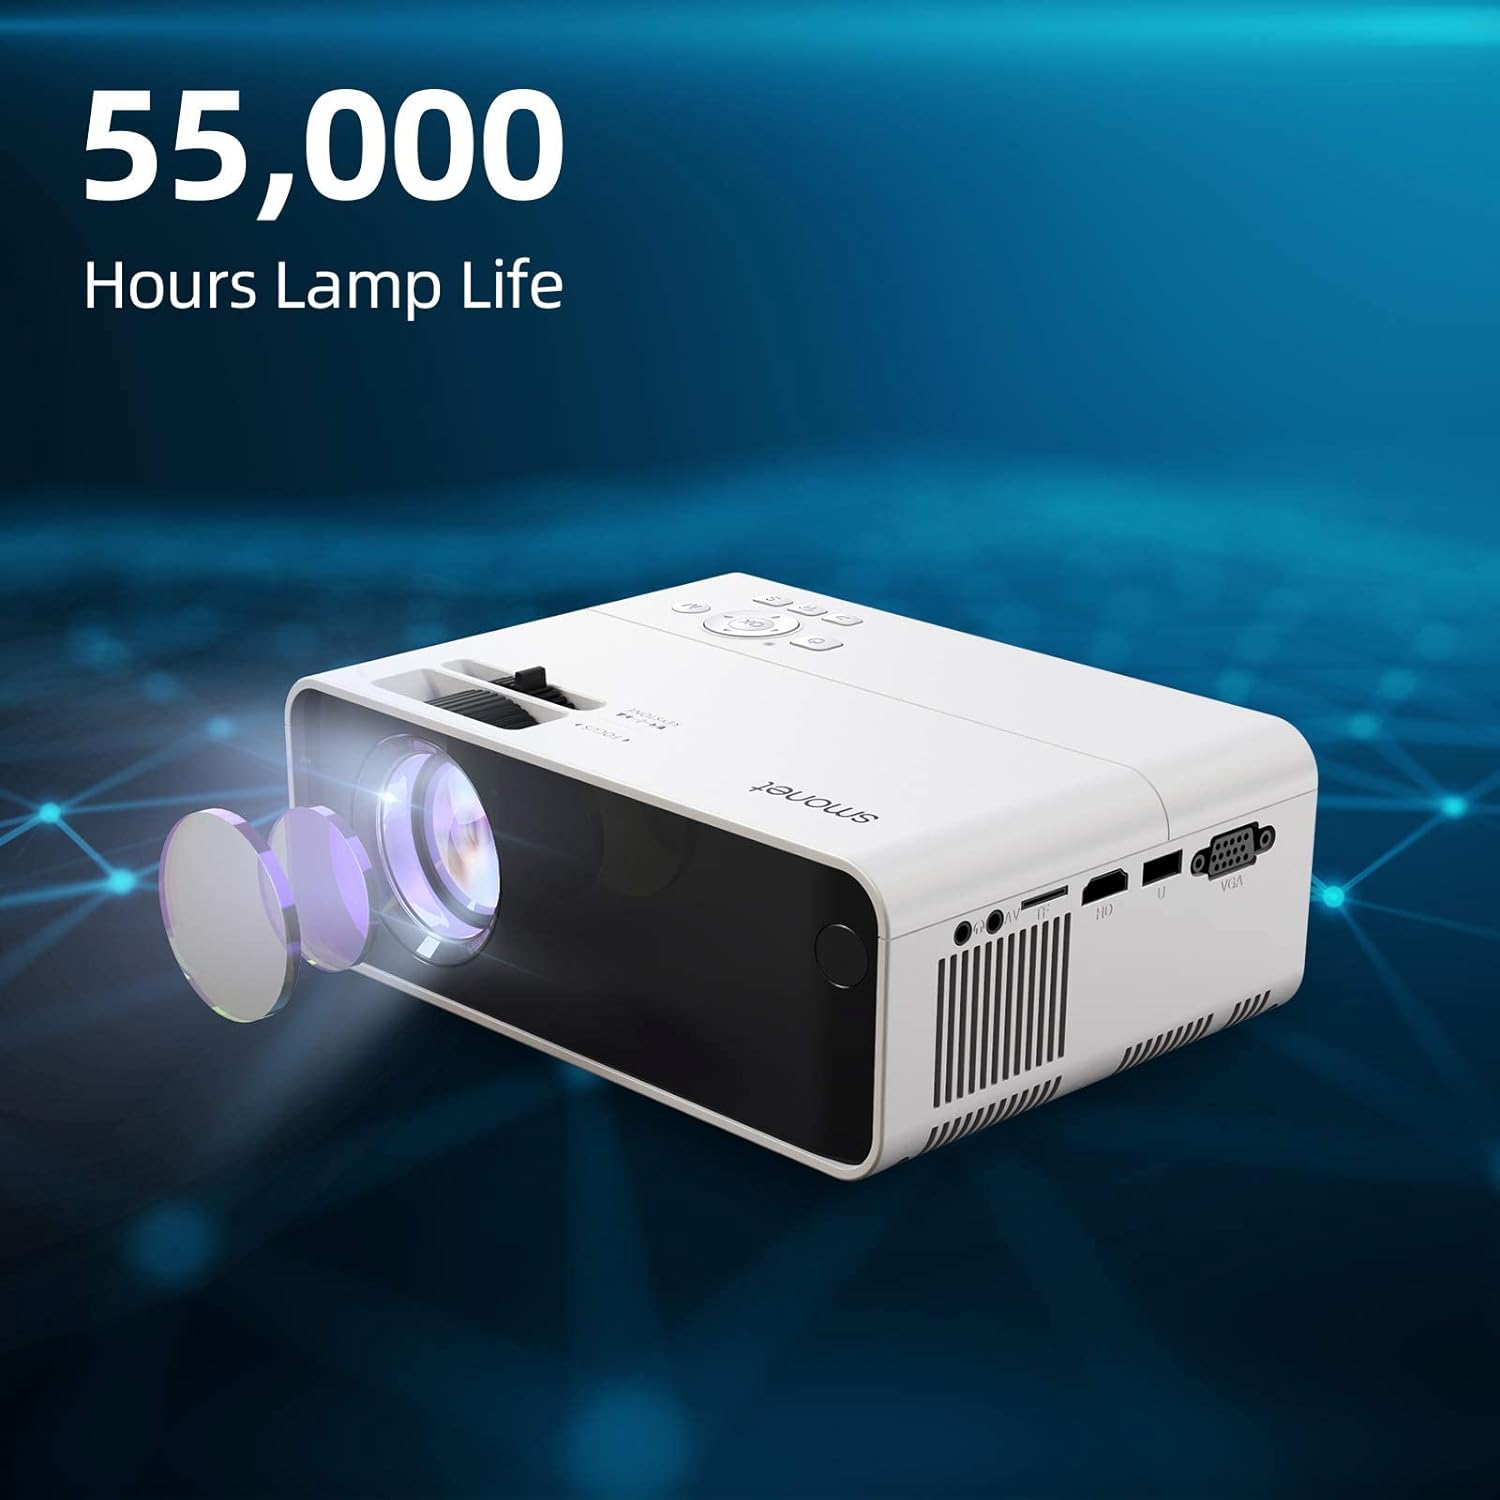 Check of Movie Projector, SMONET 1080P HD Projector 7500L